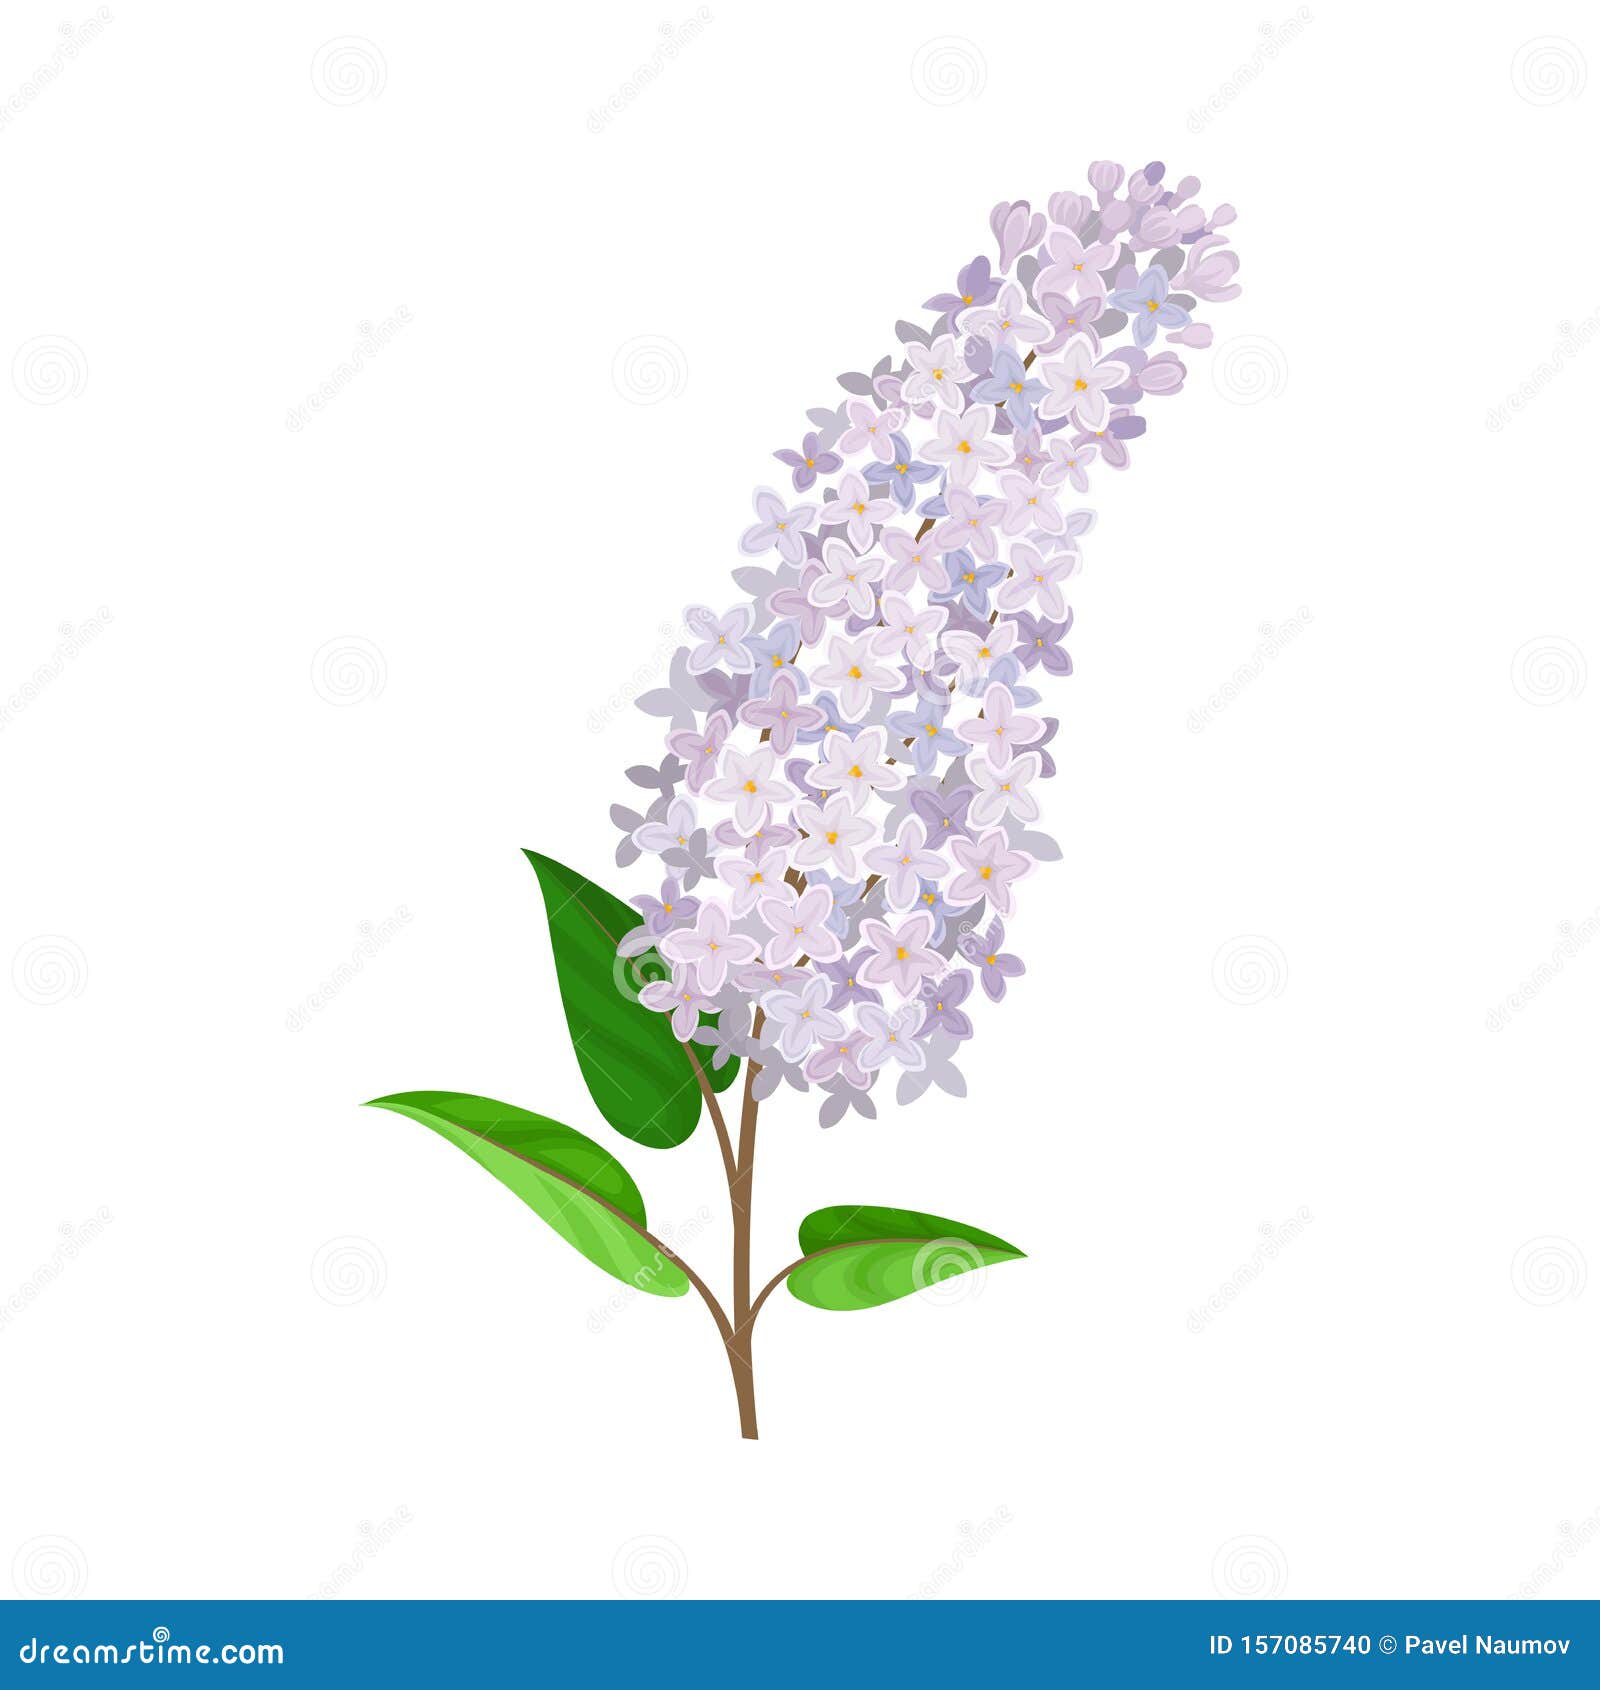 Flowering Lush Branch of Lilac. Vector Illustration on a White ...